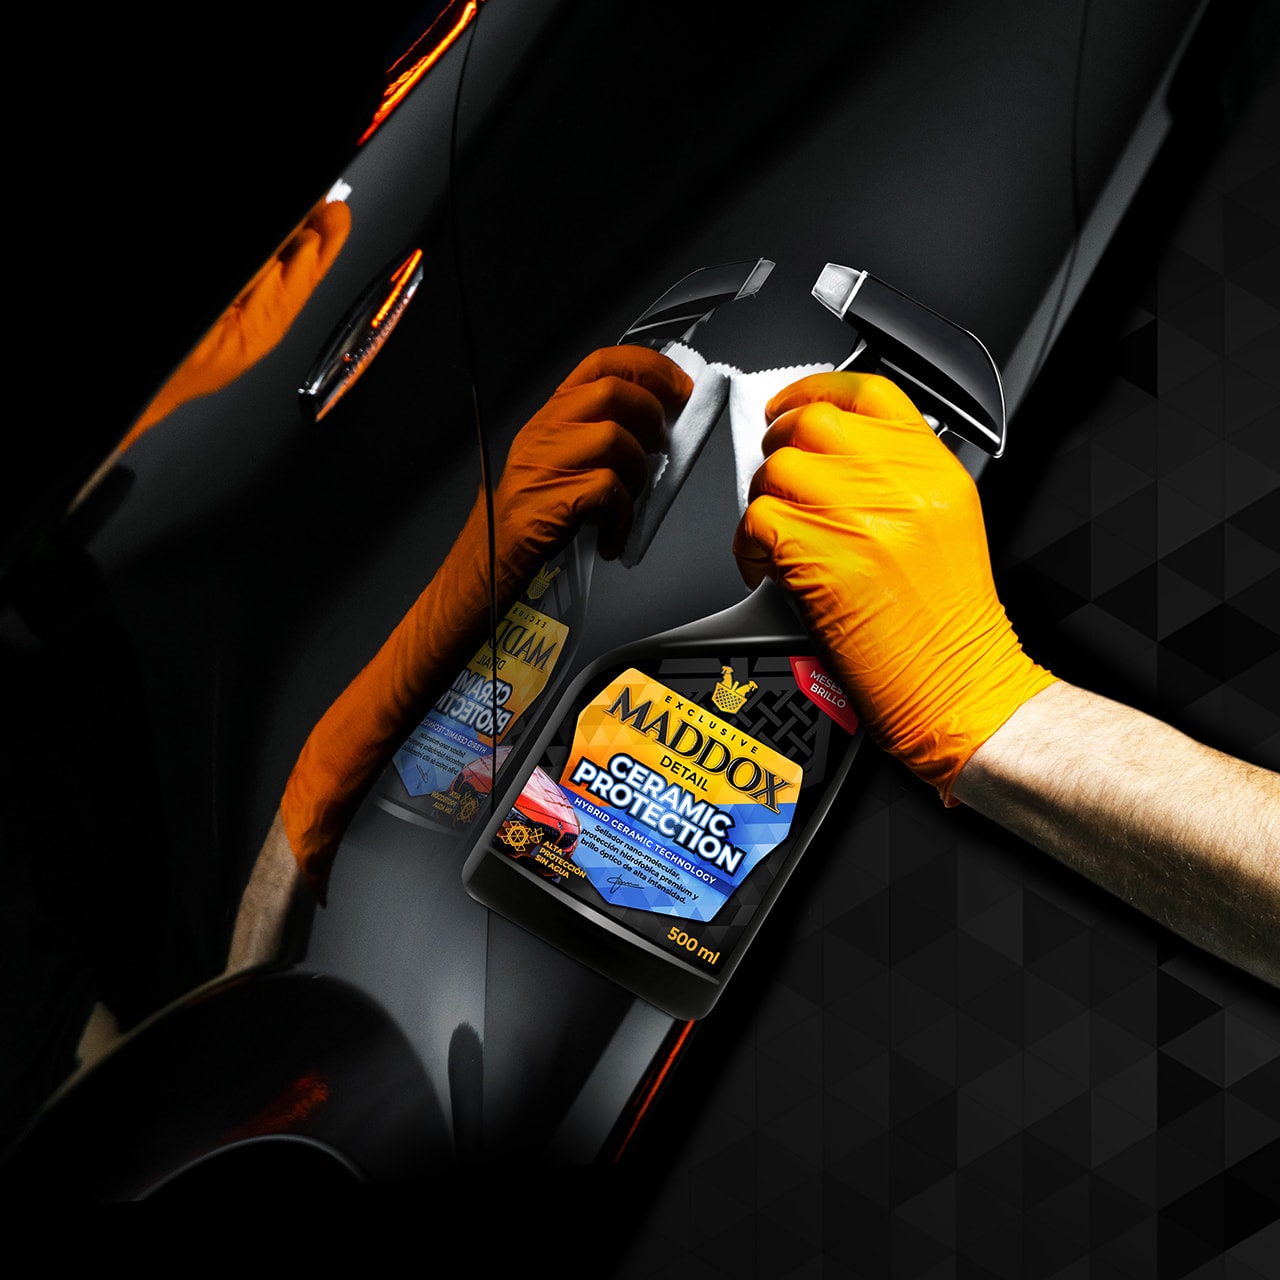 Maddox Detail launches the ceramic range products for car detailing